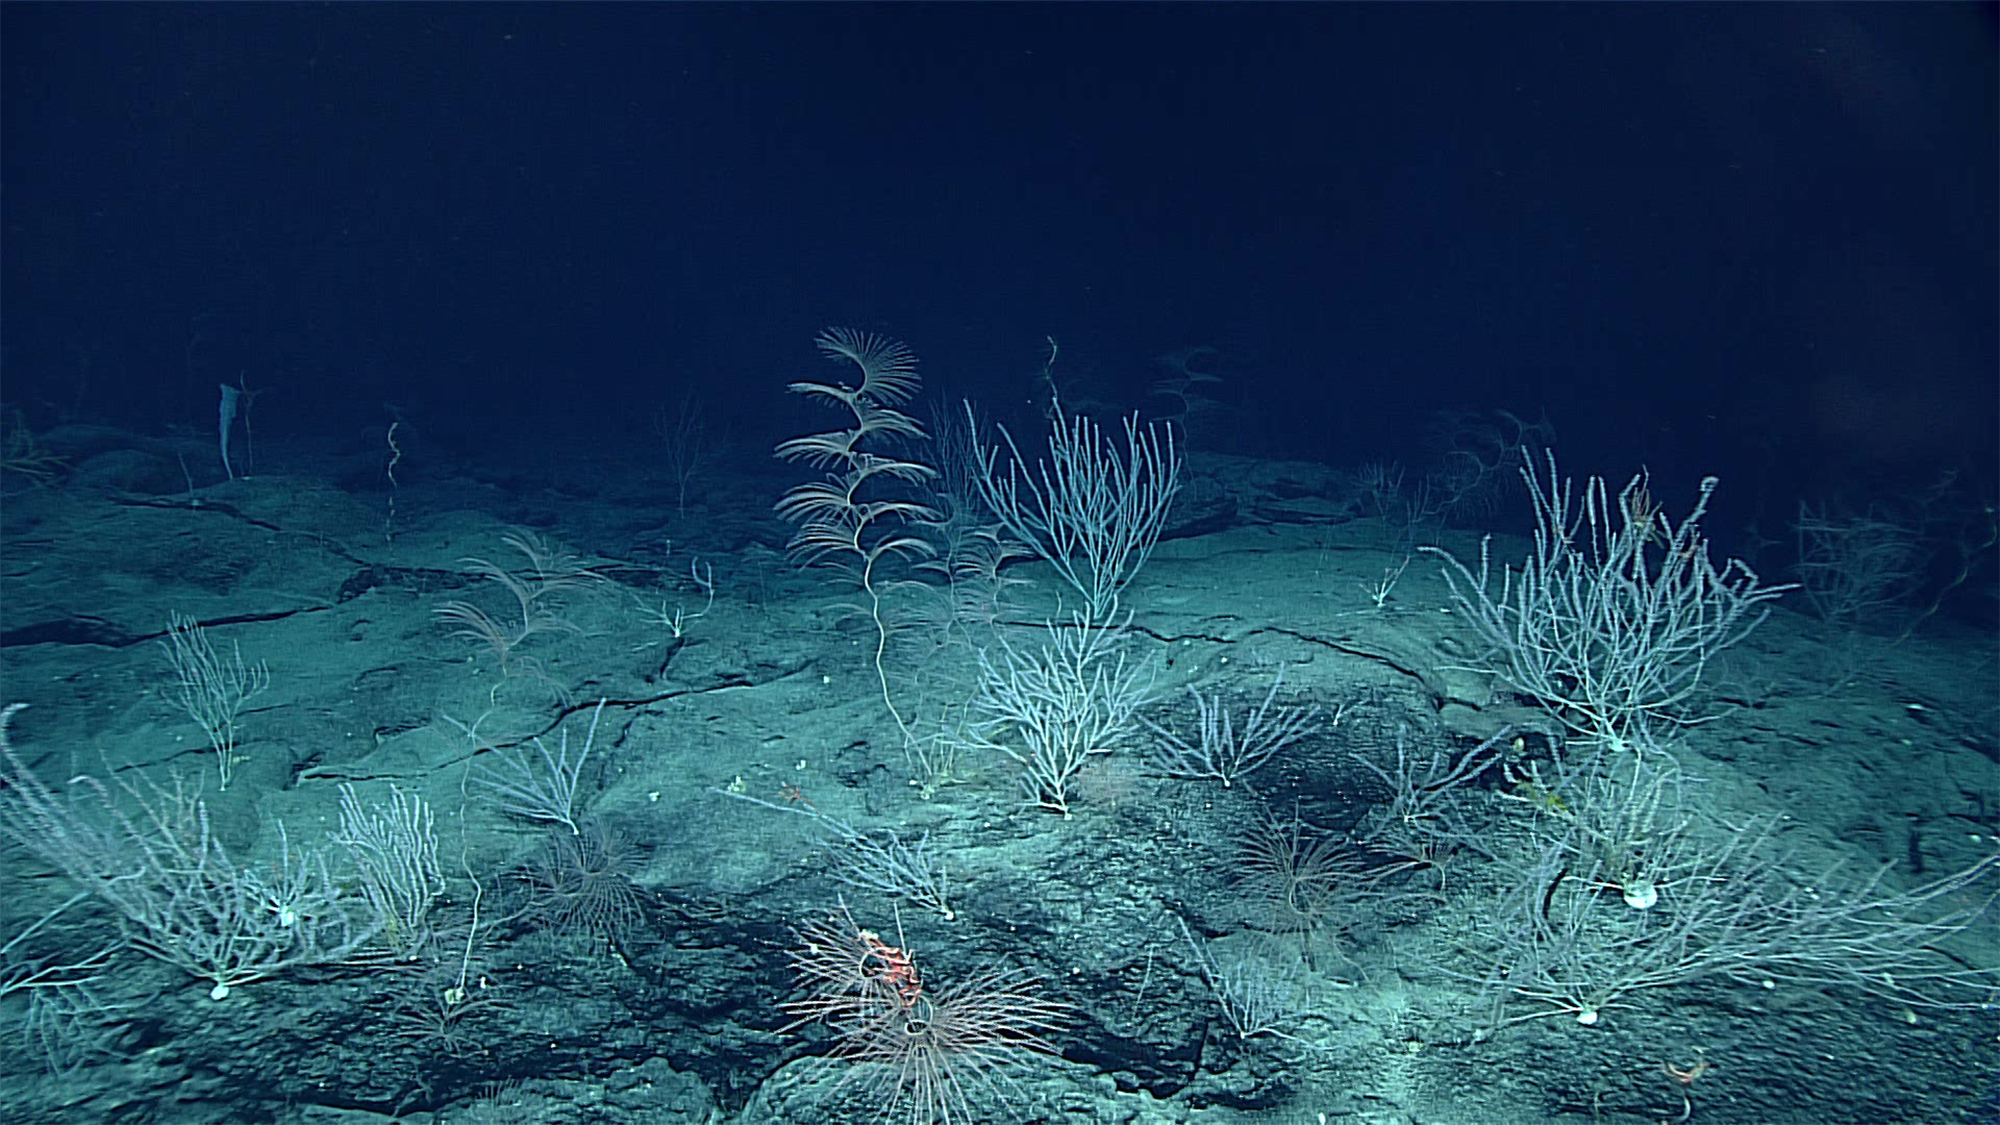 A high-density field of corals, including the spiraling Iridogorgia magnispiralis. Image courtesy of the NOAA Office of Ocean Exploration and Research, 2016 Deepwater Exploration of the Marianas.